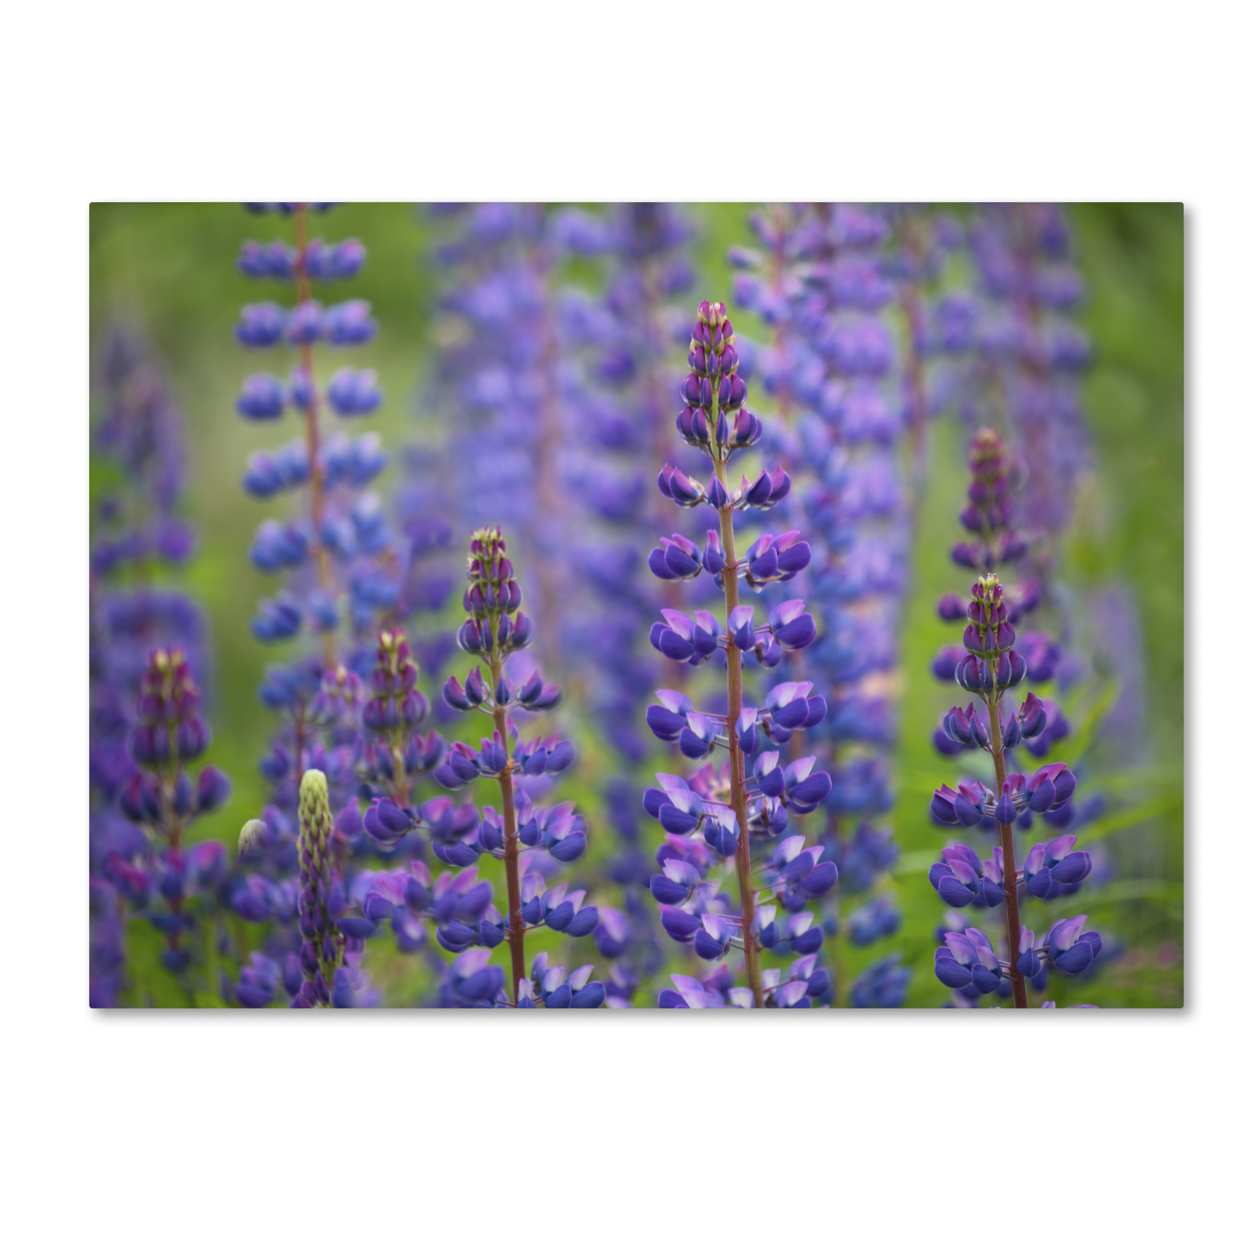 Cora Niele 'Blue Lupine Flowers' Canvas Wall Art 35 X 47 Inches